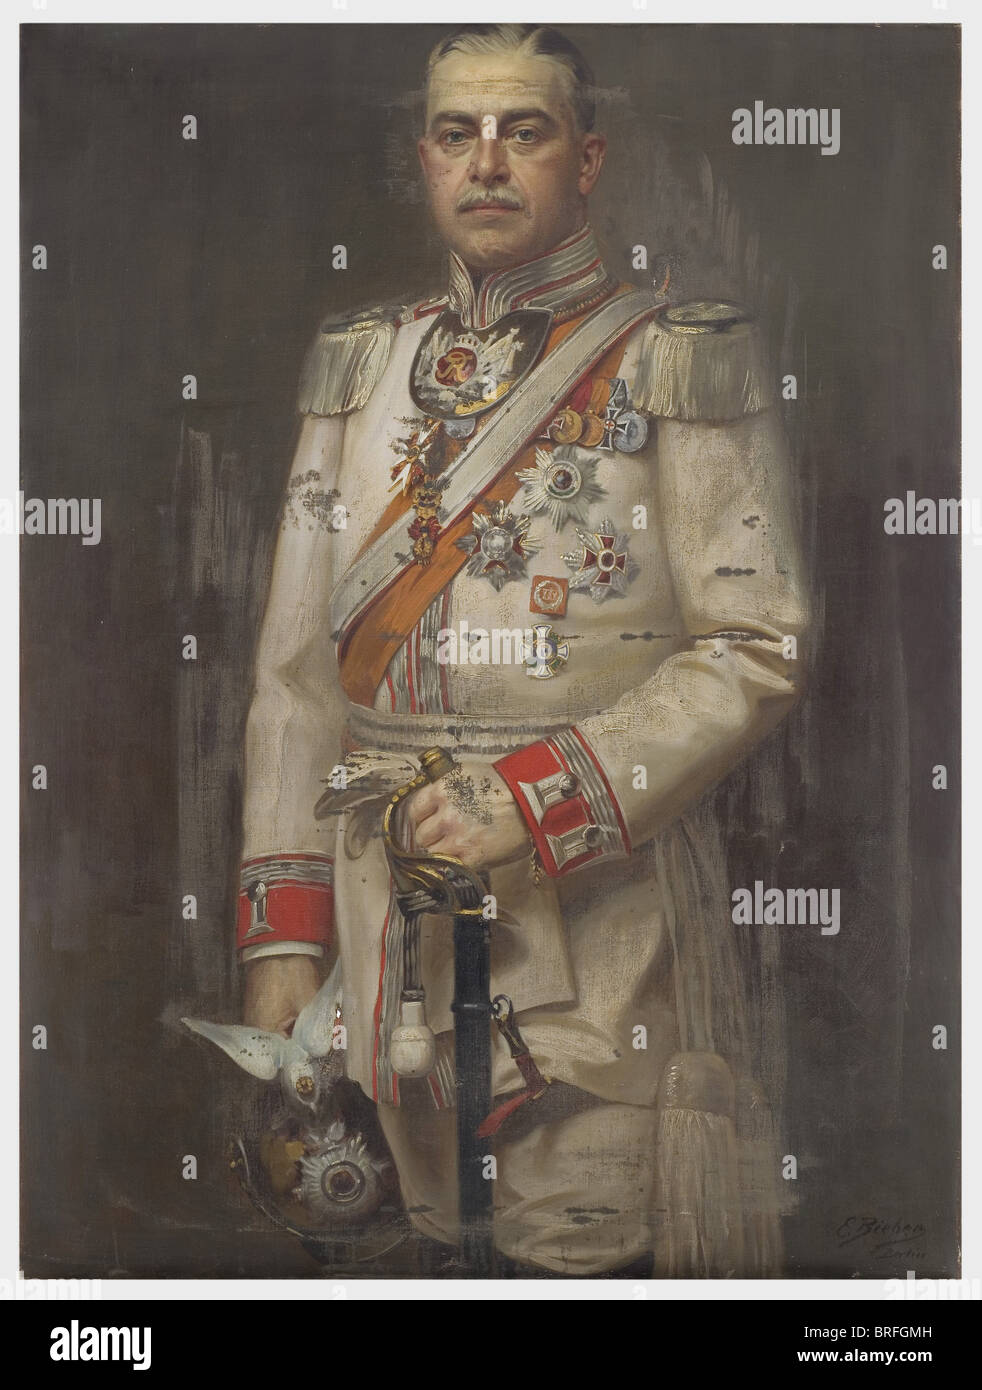 Gottfried Prinz zu Hohenlohe-Schillingsfürst (1867 - 1932) - portrait of the prince as colonel à la suite, of the Regiment Garde du Corps in full uniform with orders (Golden Fleece, High Order of the Black Eagle, Order of the Red Eagle, Order of Leopold, Baden House Order of Fidelity, Royal House Order of Hohenzollern etc.). Oil on canvas, 123 x 92 cm, signed on lower right 'E. Bieber, Berlin'. The verso of the painting was later again used for a lady's portrait, a few restorable stains. Gottfried Prinz zu Hohenlohe-Schillingsfürst was married to the Austrian A, Stock Photo